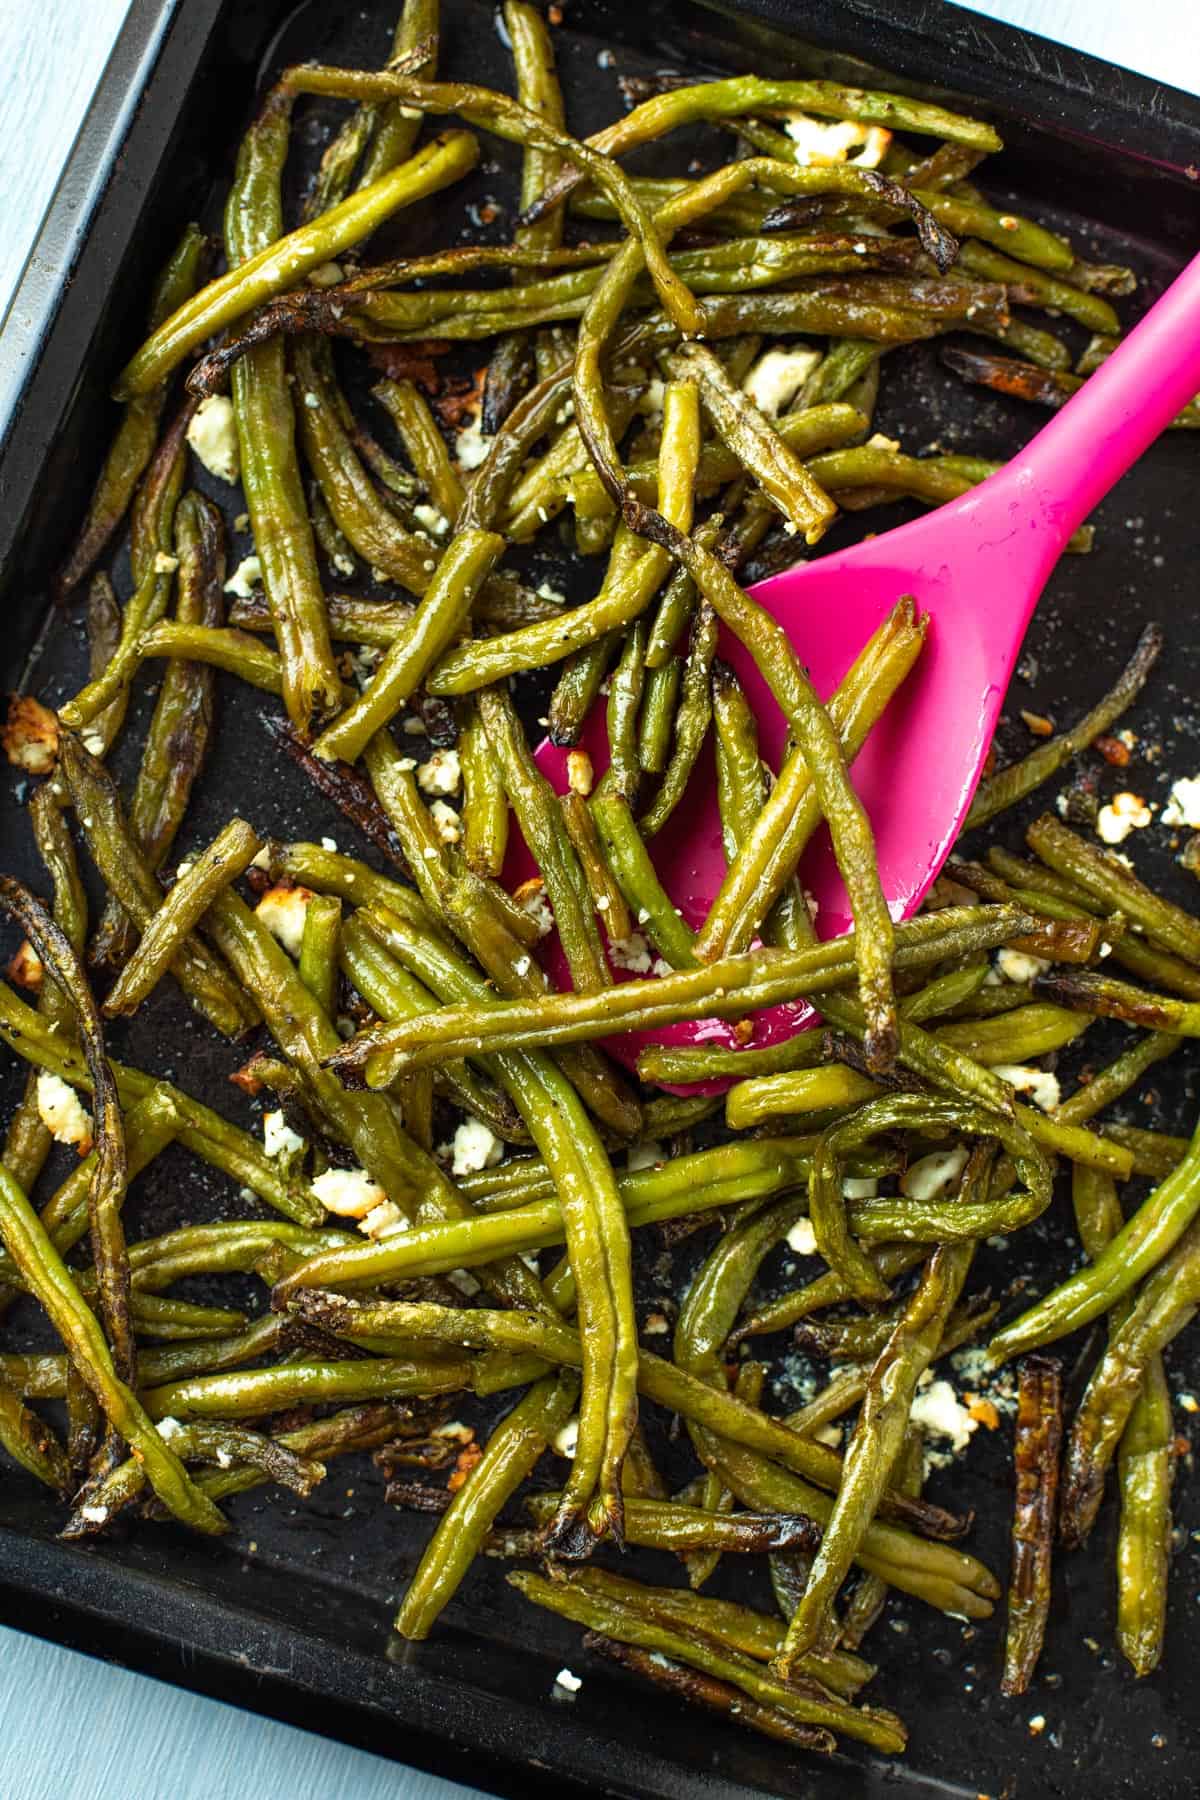 Roasted green beans with feta and lemon juice on a baking tray.